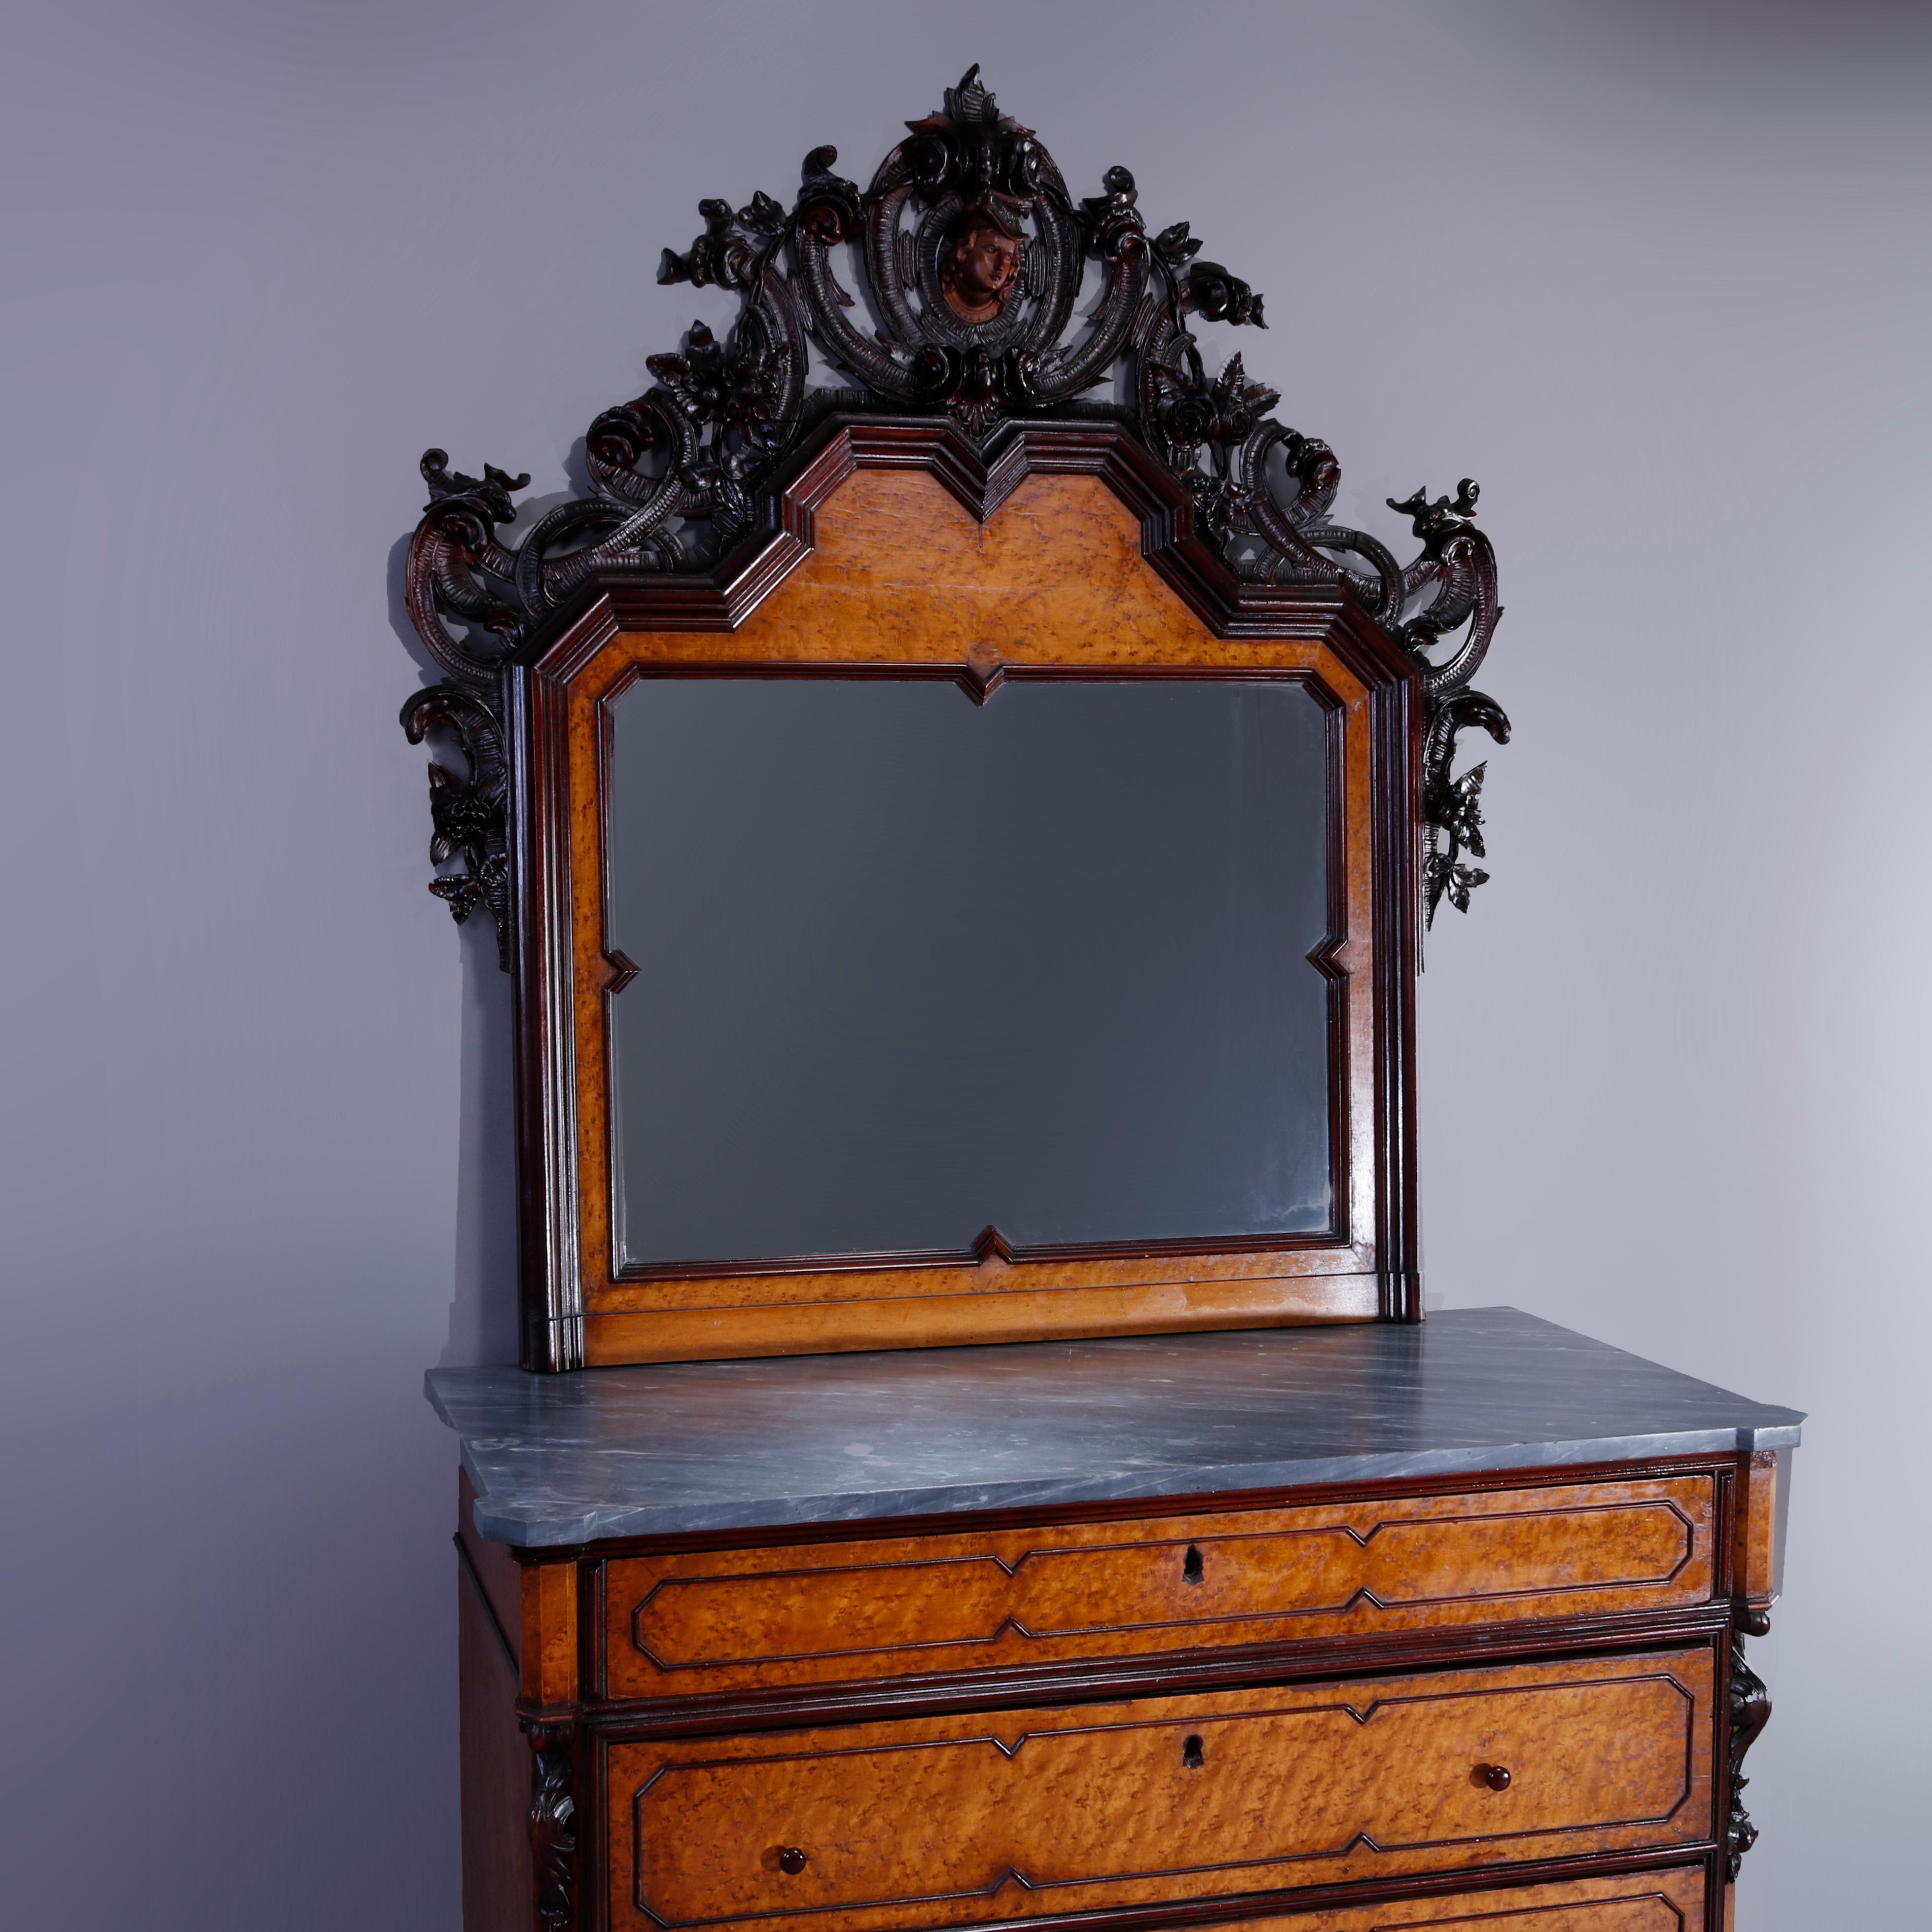 An antique Rococo Revival figural and mirrored chest of drawers offers birdseye maple construction with heavily carved and pierced foliate walnut crest with central mask over mirror surmounting lower marble top case with paneled long drawers with